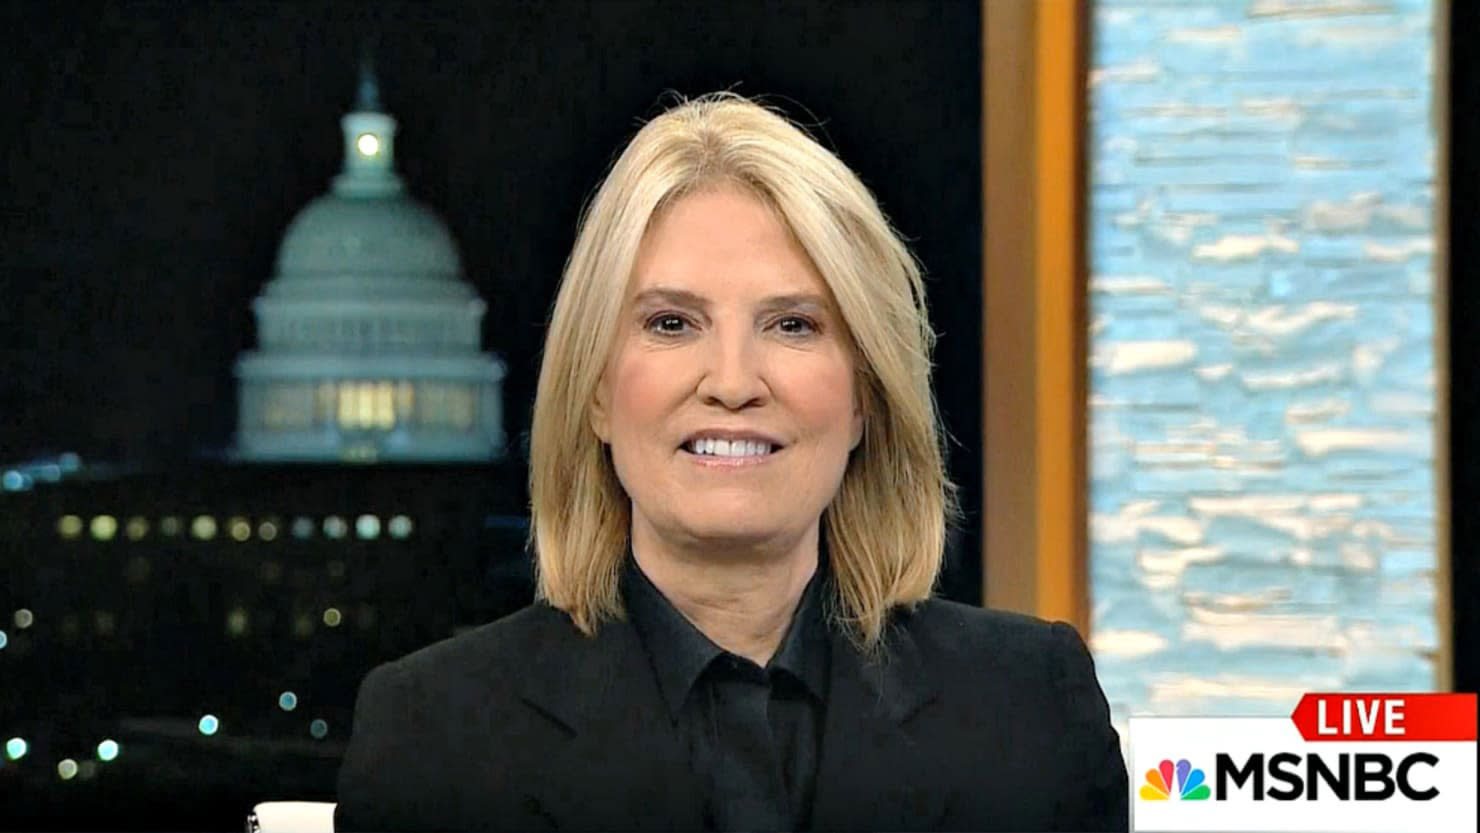 Less than six months after she joined MSNBC from Fox News Channel, Greta va...